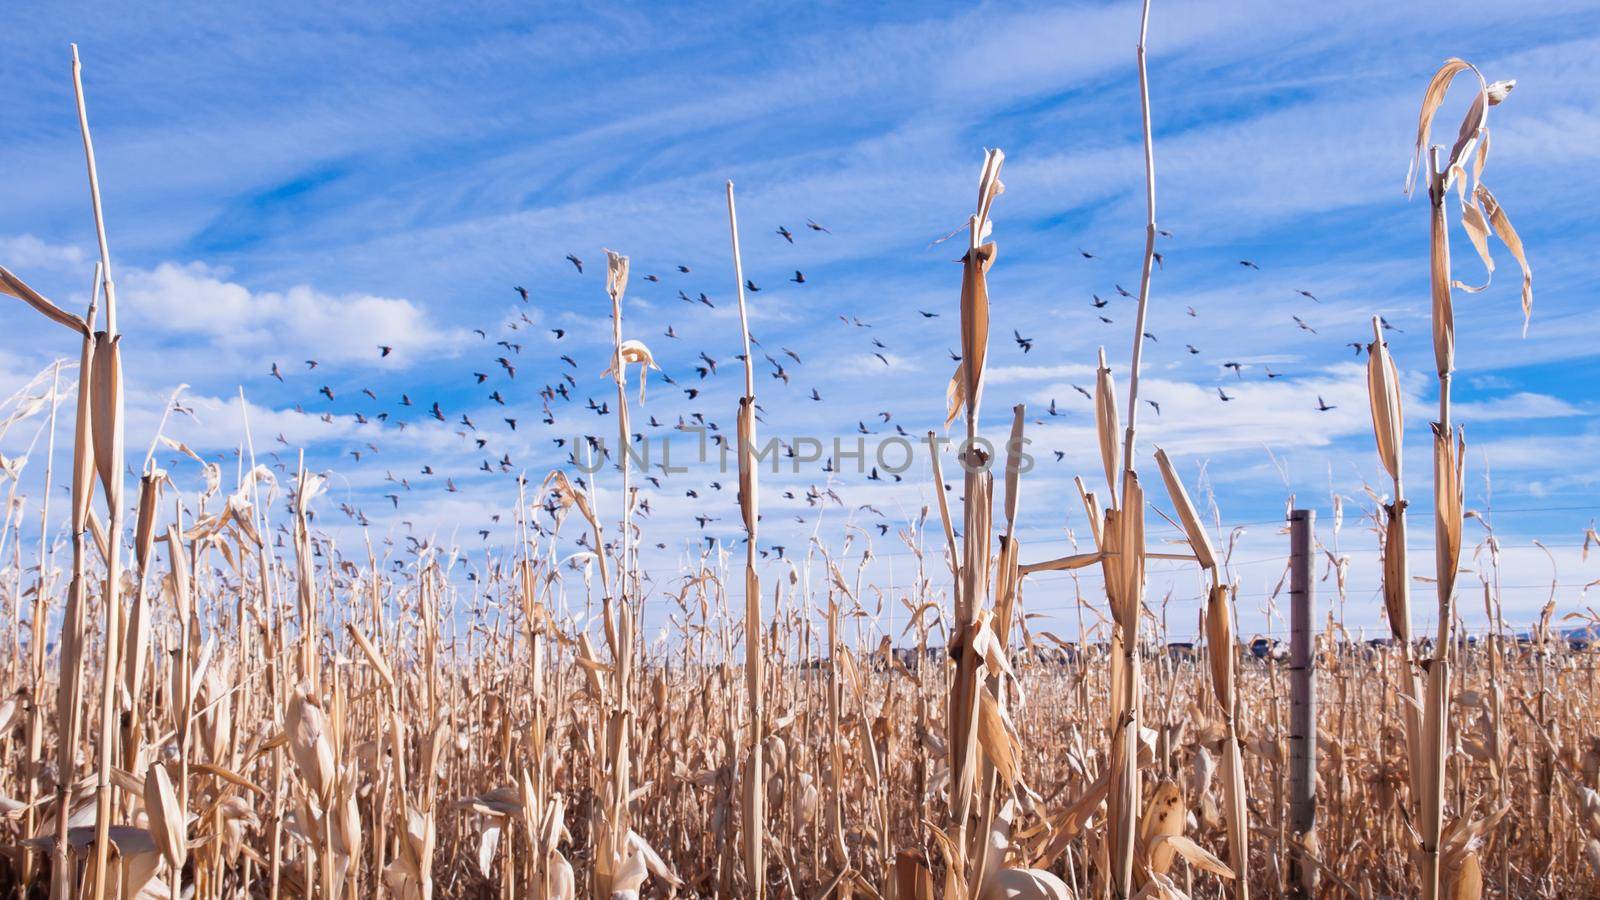 Crows flying above a corn field in autumn.